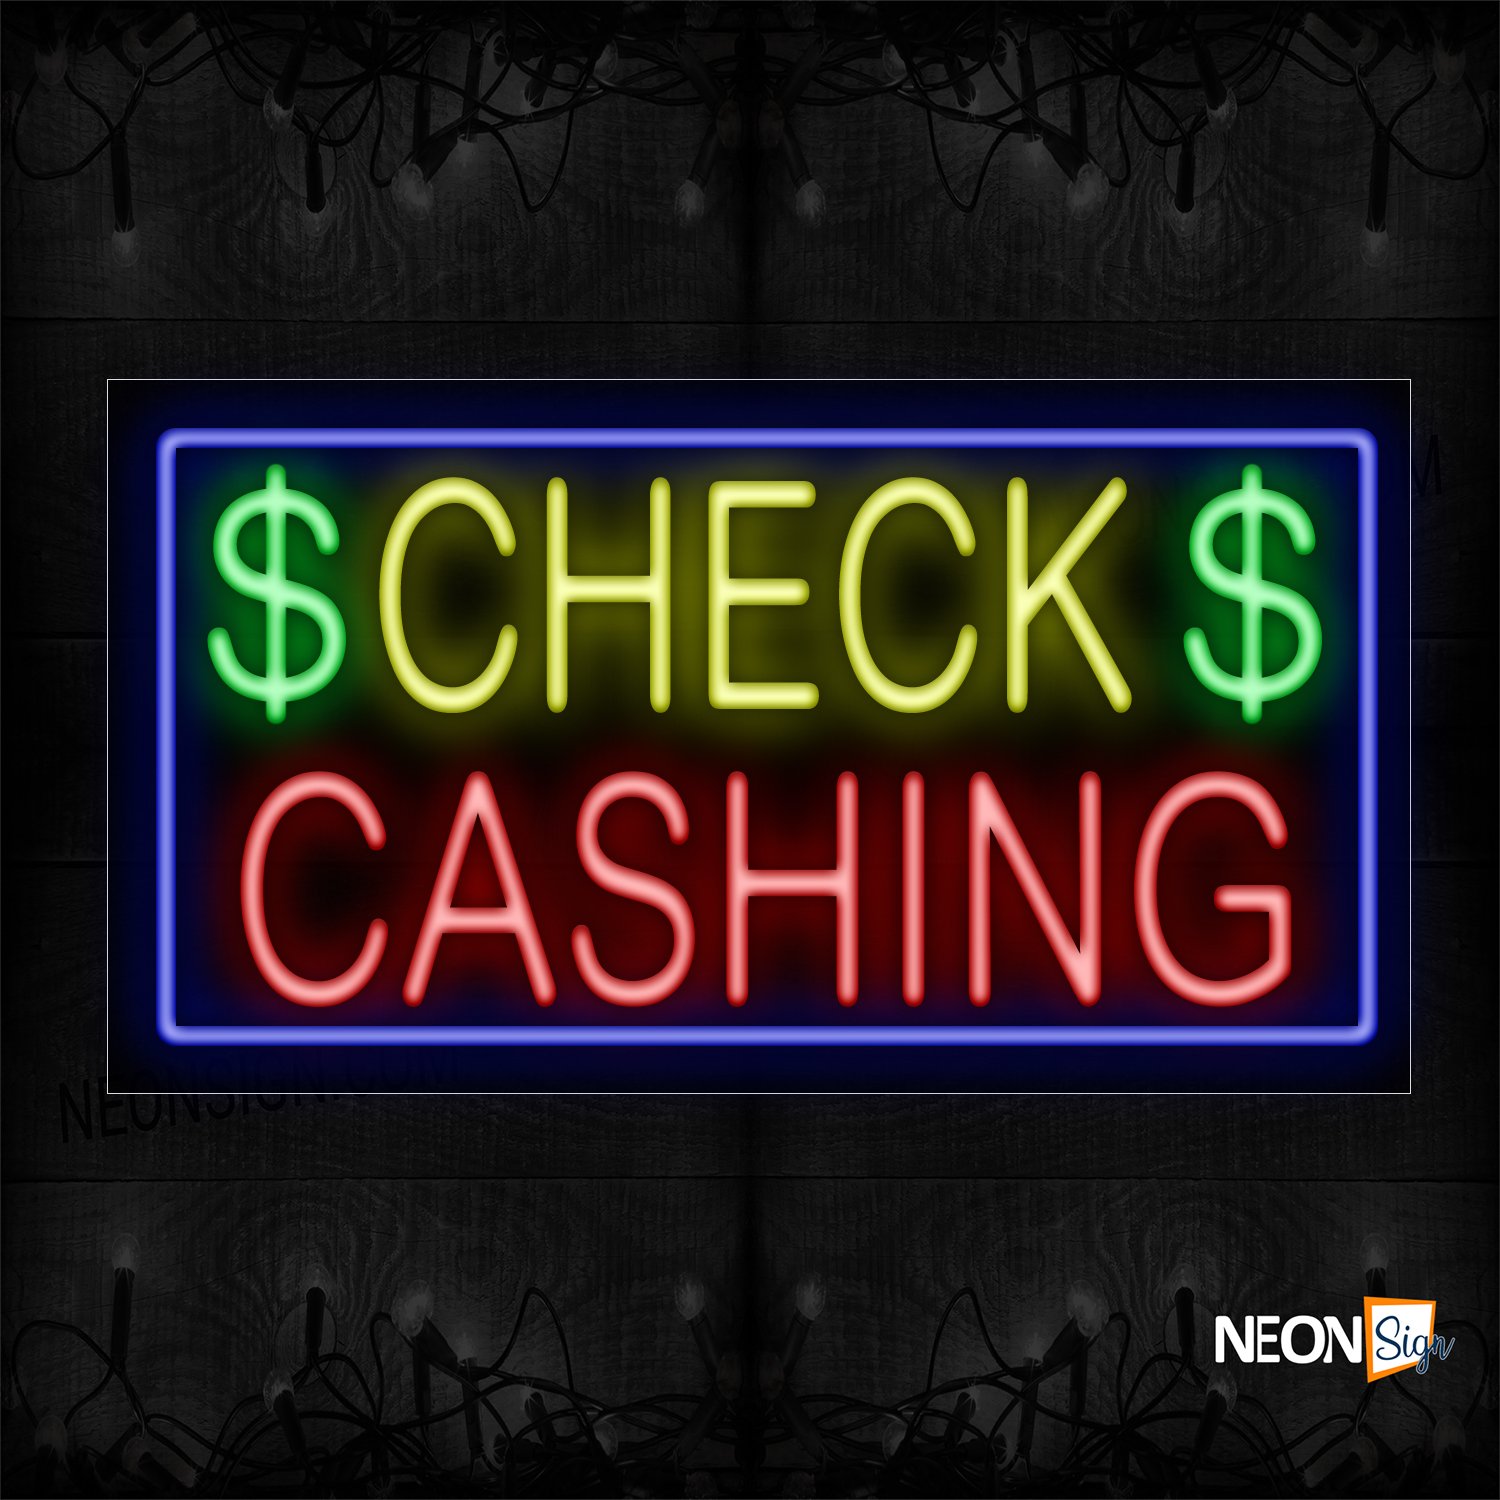 Image of 11276 $ Check $ Cashing With Blue Border Neon Sign_20x37 Black Backing